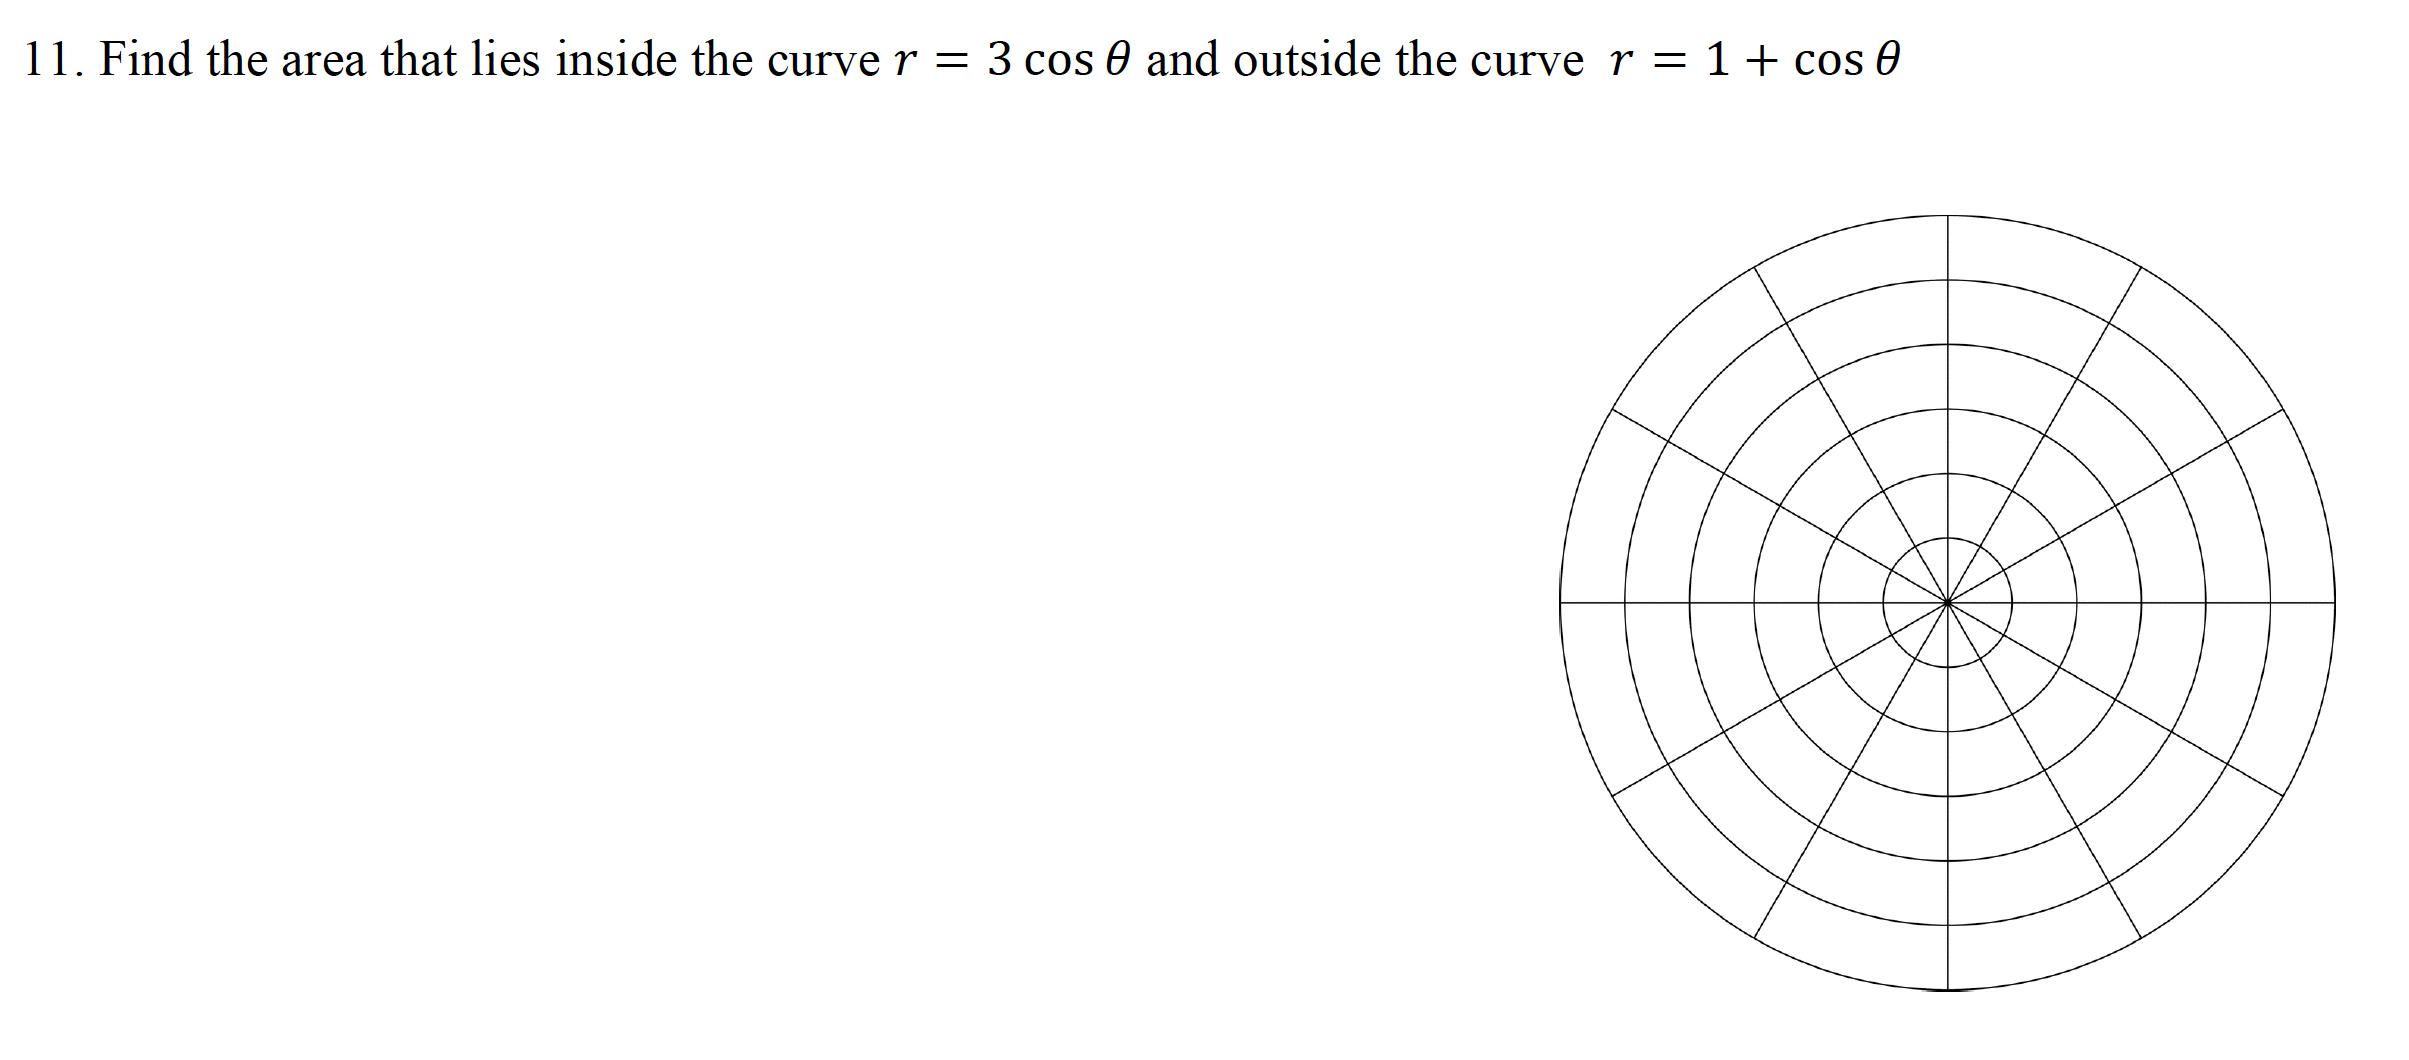 . Find the area that lies inside the curve r = 3 cos 0 and outside the curve r = 1+ cos 0
